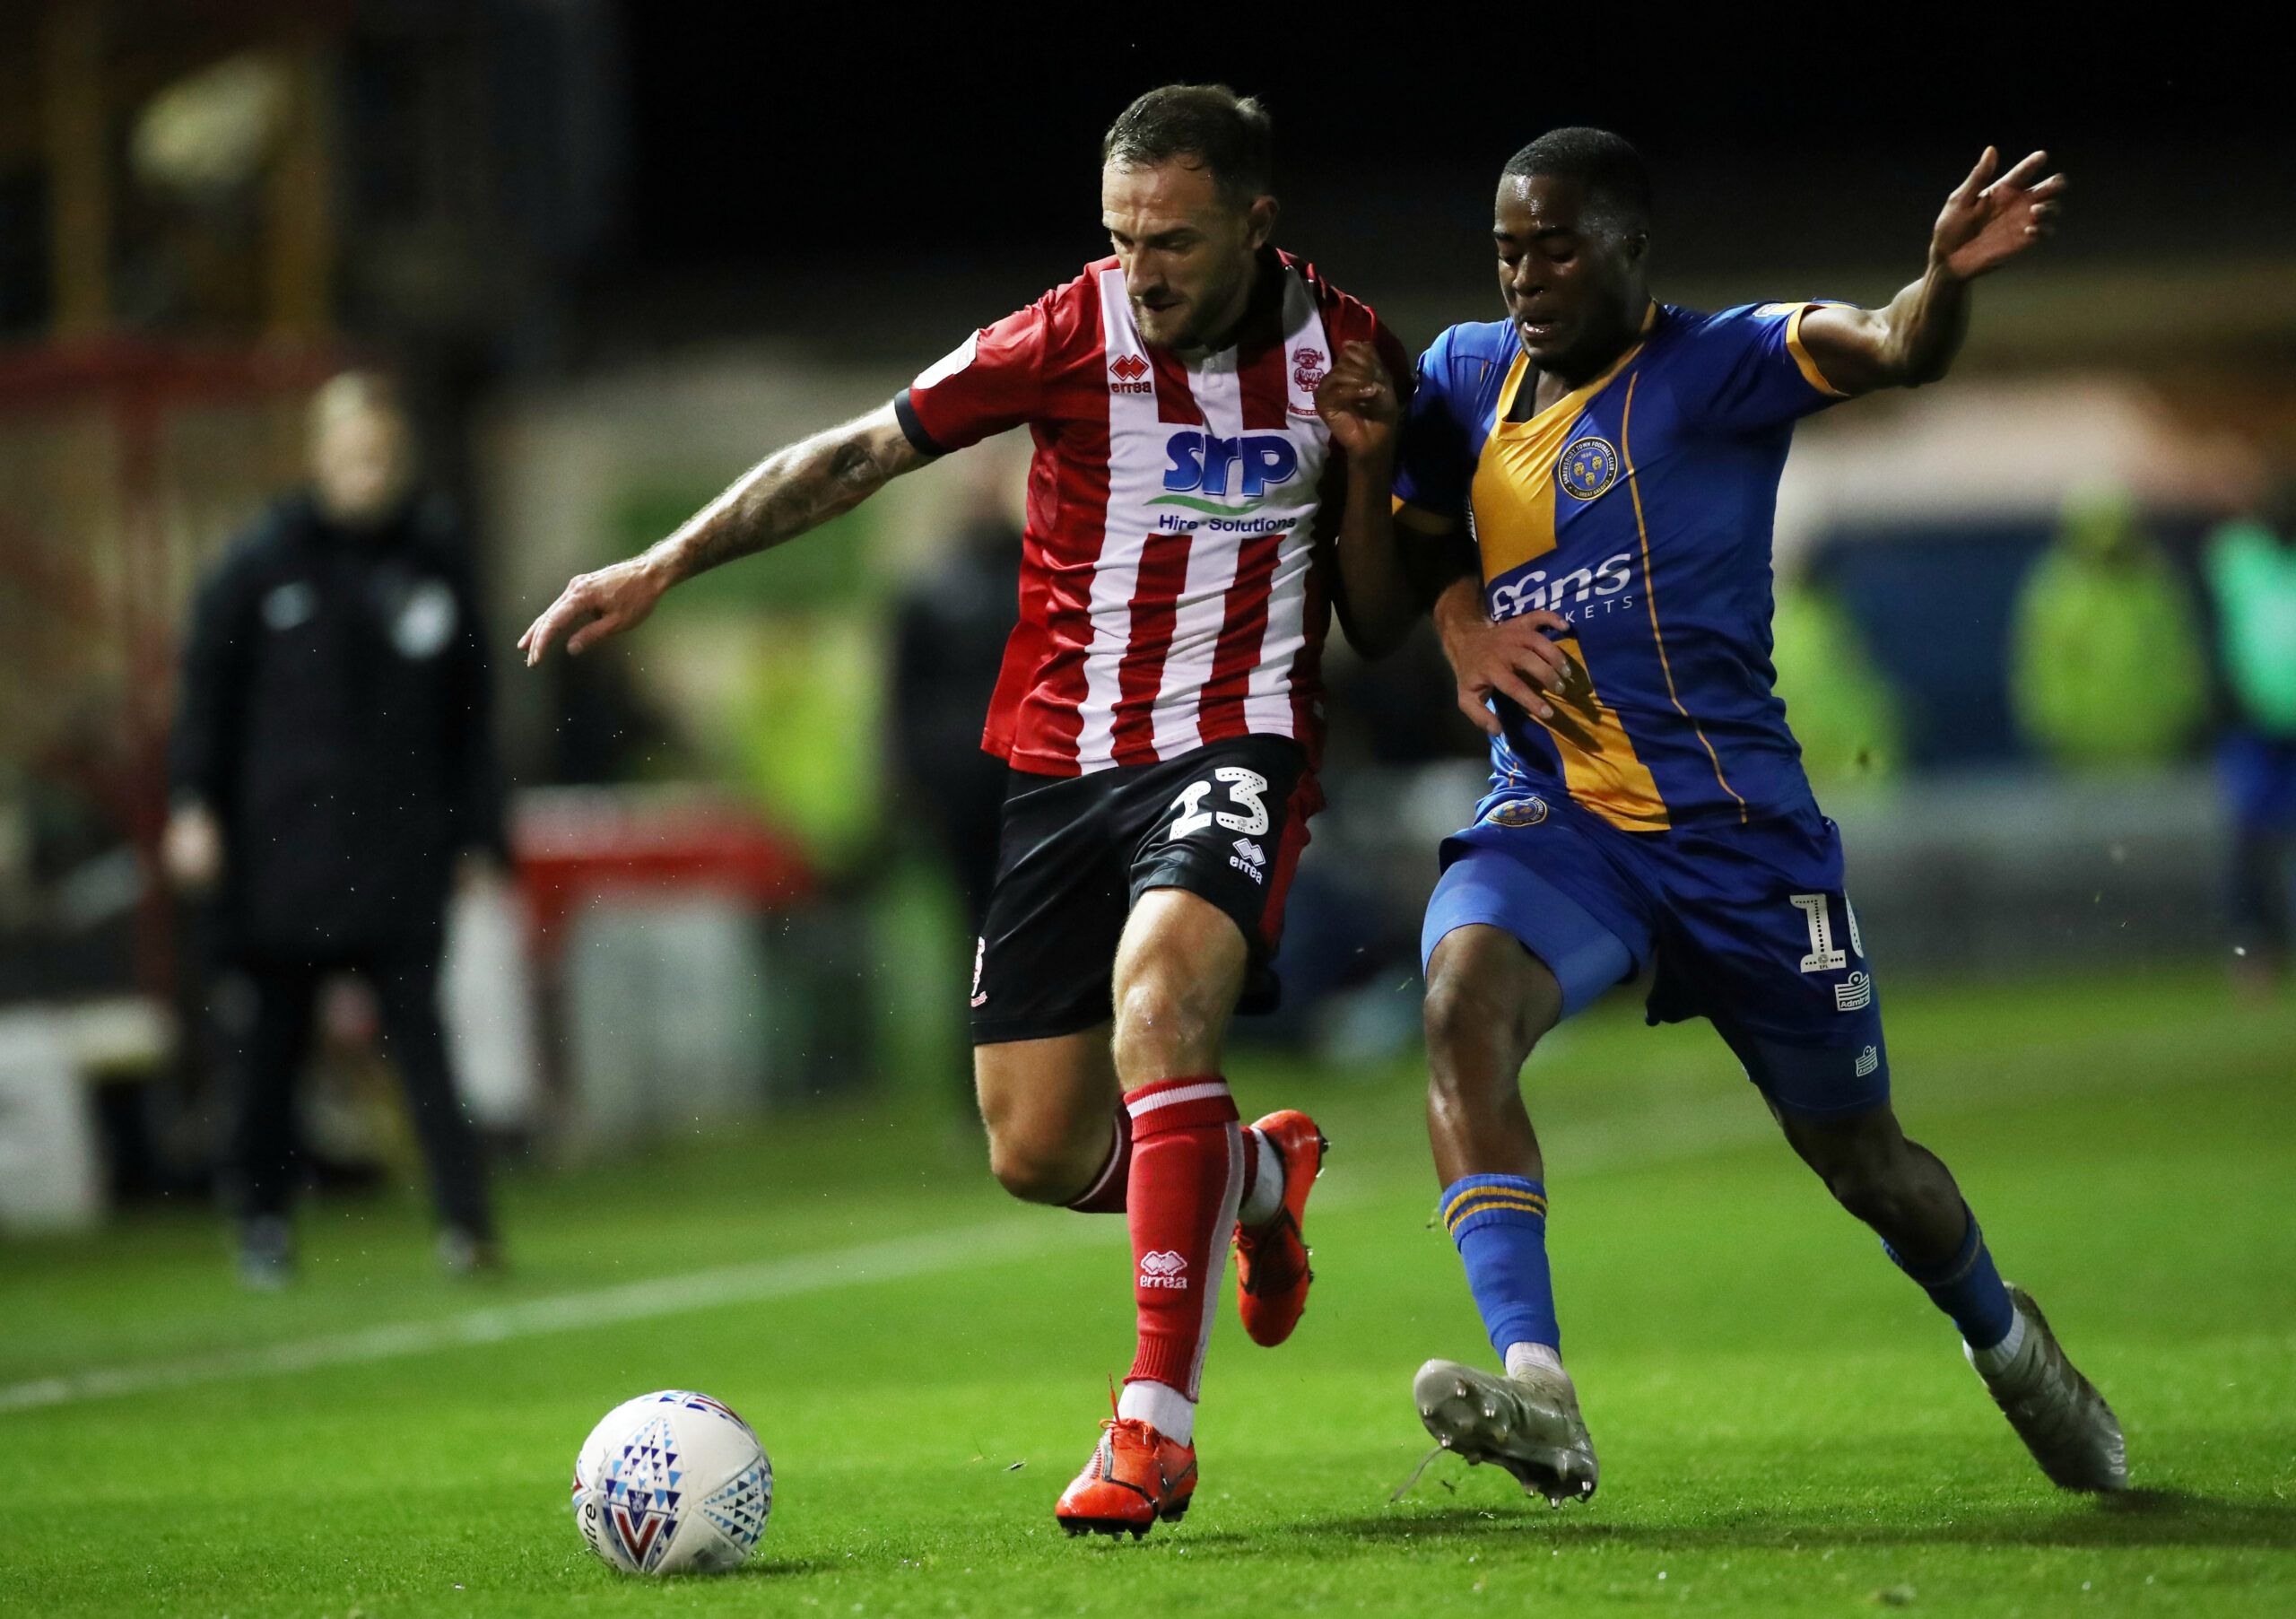 Soccer Football - League One - Lincoln City v Shrewsbury Town - Sincil Bank, Lincoln, Britain - October 18, 2019   Lincoln City's Neal Eardley in action with Shrewsbury Town's Fejiri Okenabirhie   Action Images/Carl Recine    EDITORIAL USE ONLY. No use with unauthorized audio, video, data, fixture lists, club/league logos or 